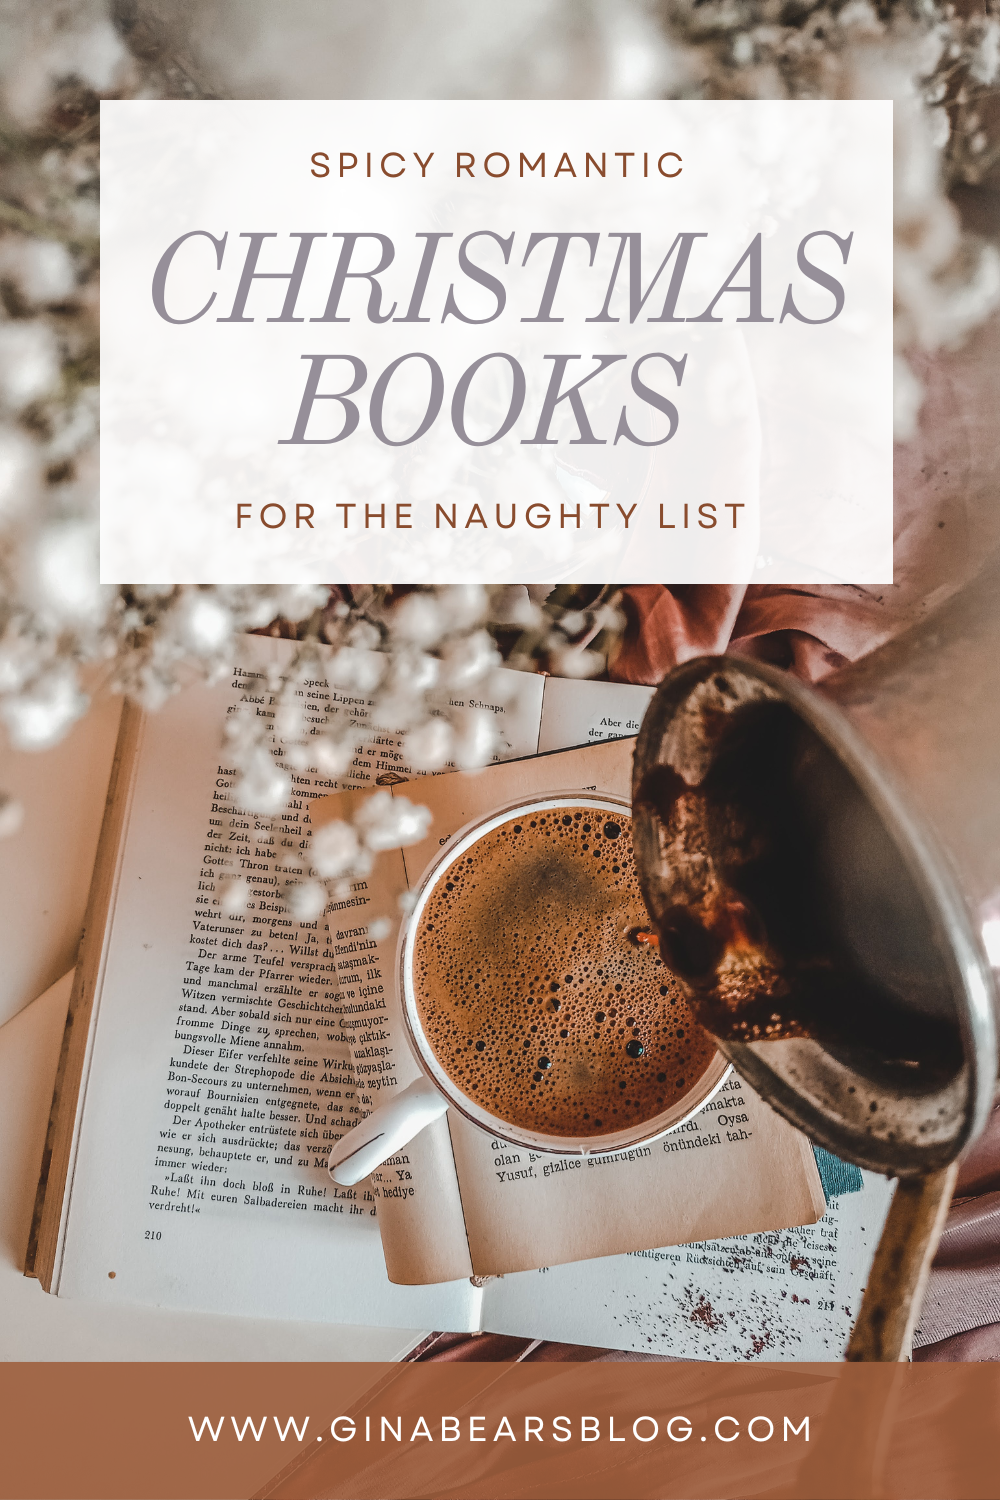 Spicy Christmas Romance Books For The Naughty - Gina Bear's Blog